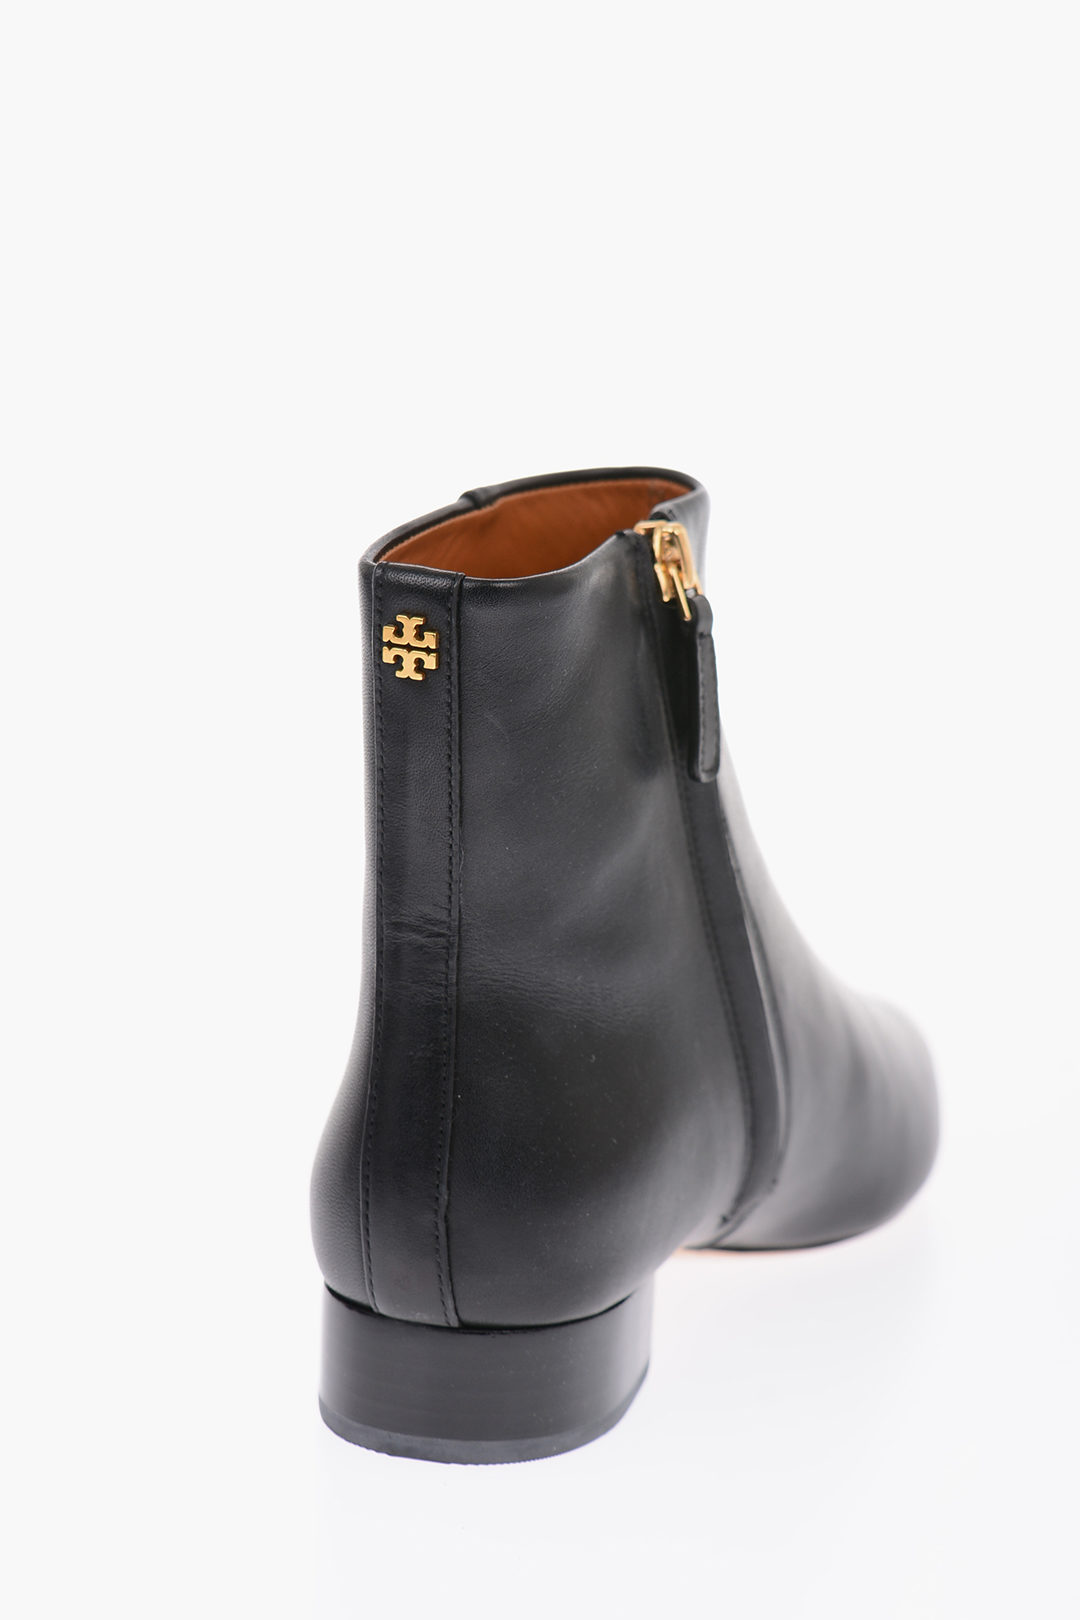 Tory Burch leather Point Toe LILA Booties women - Glamood Outlet